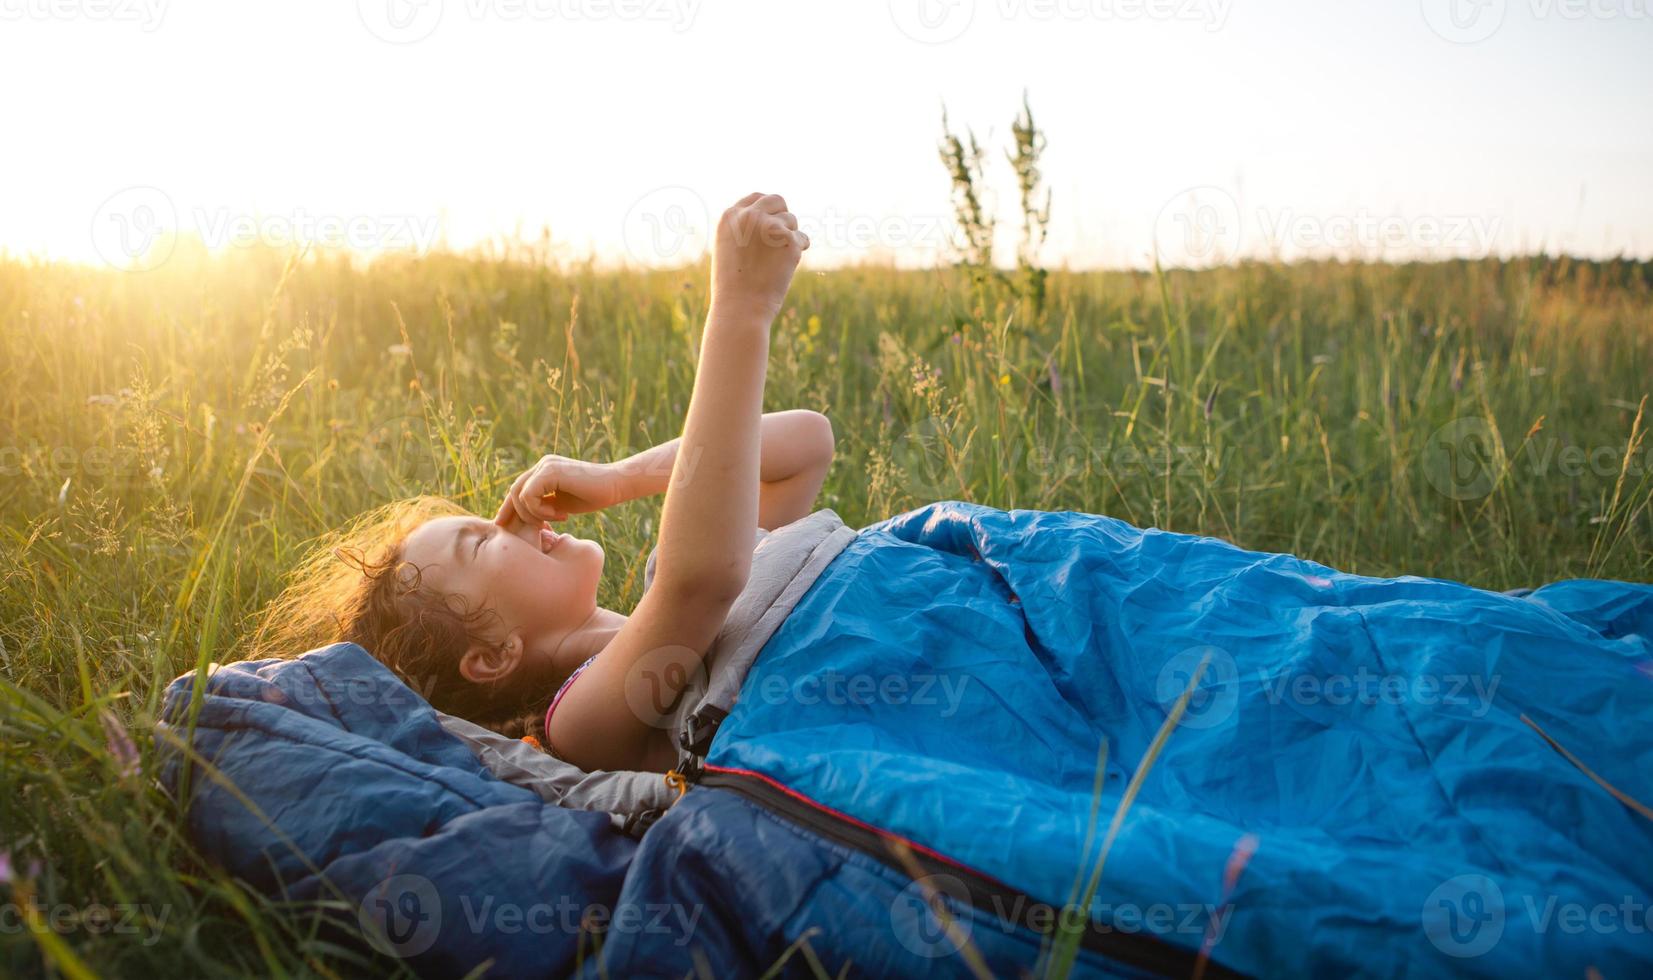 The girl is dissatisfied with scratching mosquito bites, child sleeps in a sleeping bag on the grass in a camping trip. Eco-friendly outdoor recreation, summer time. Sleep disturbance, repellent. photo